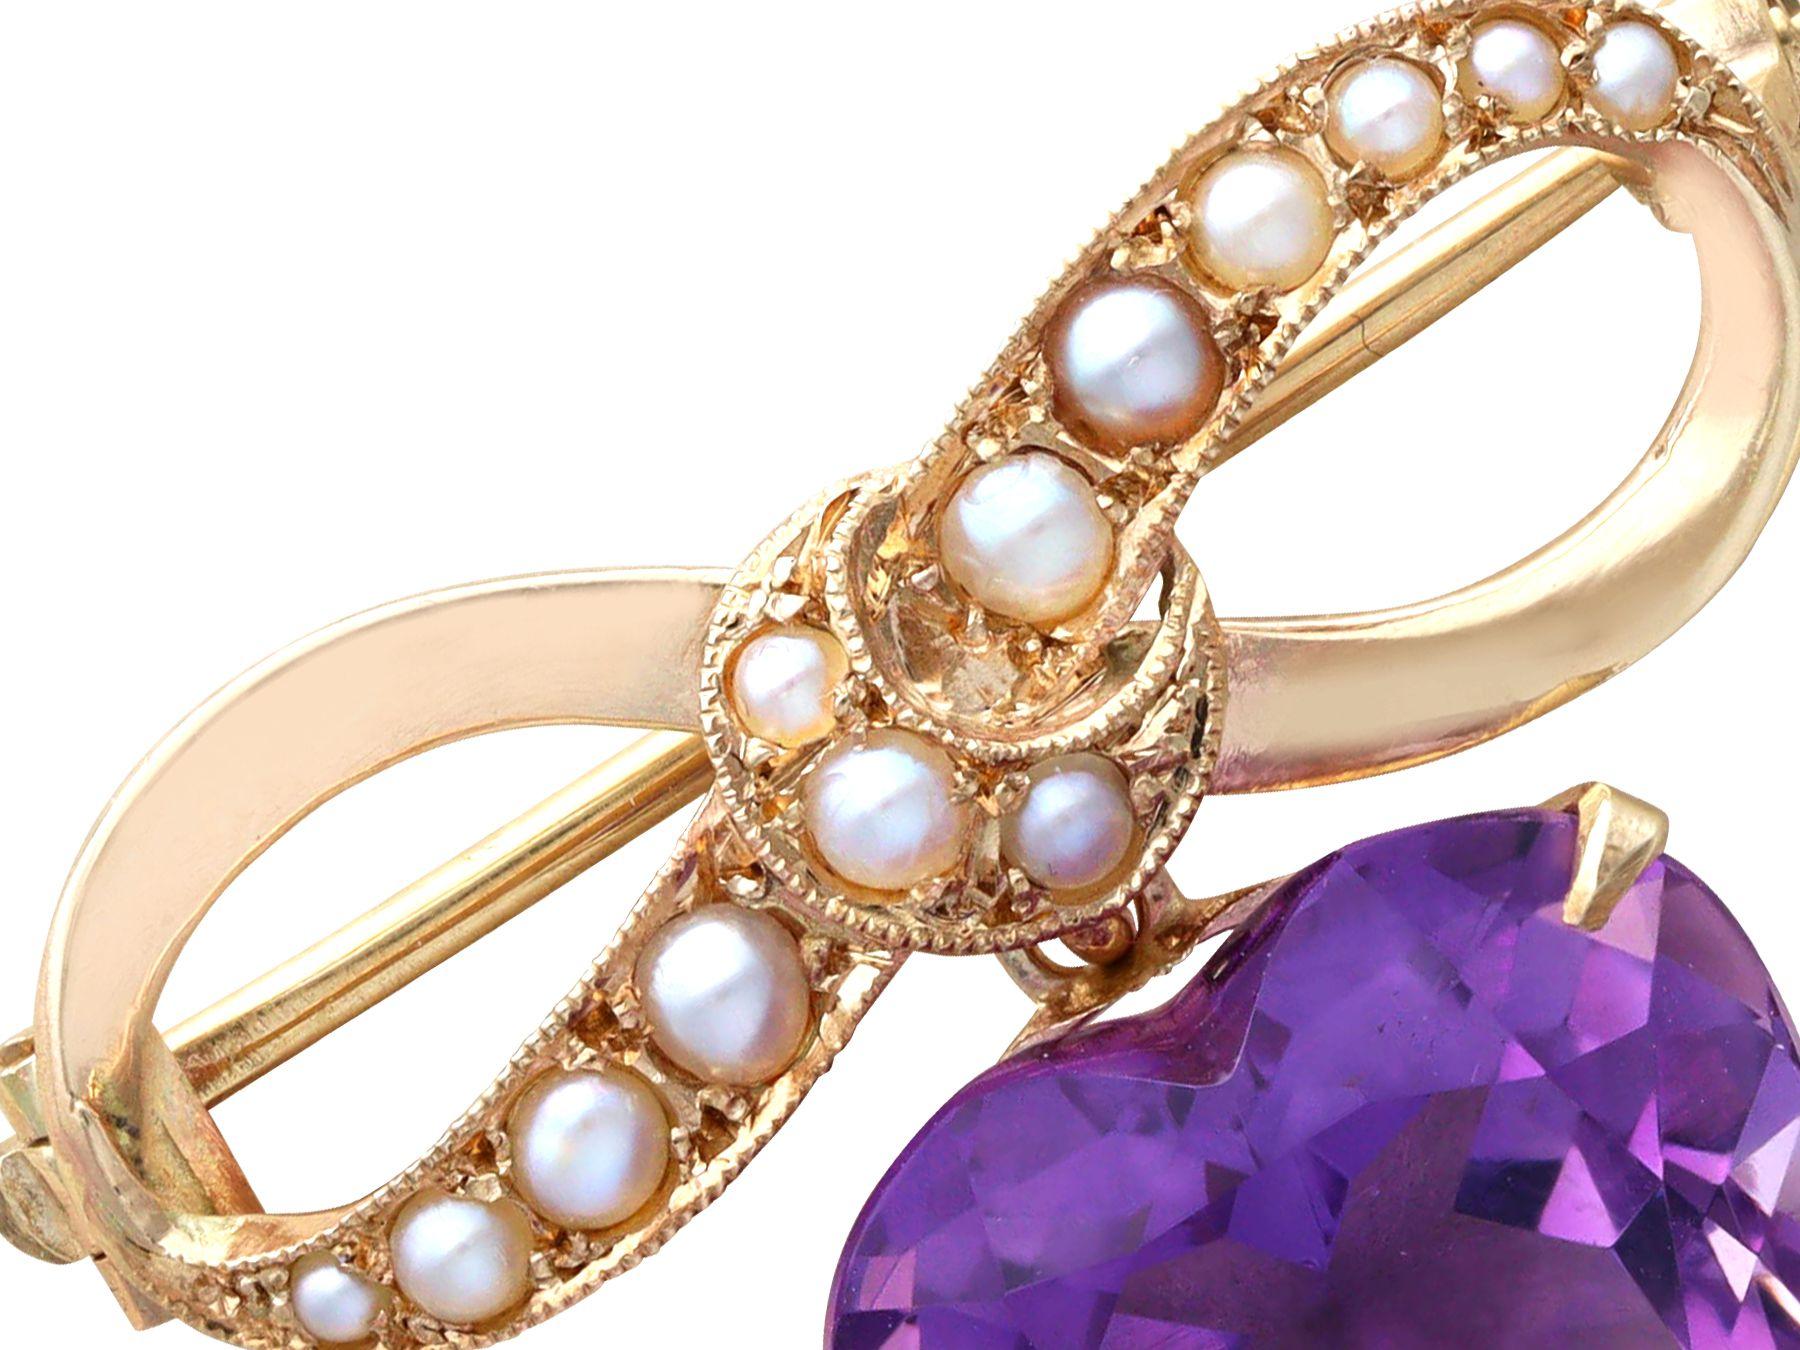 A fine and impressive 8.50 carat amethyst and seed pearl, 9 carat yellow gold lapel brooch; part of our diverse vintage jewelry and estate jewelry collections. 

This fine and impressive antique brooch has been crafted in 9ct yellow gold.

The